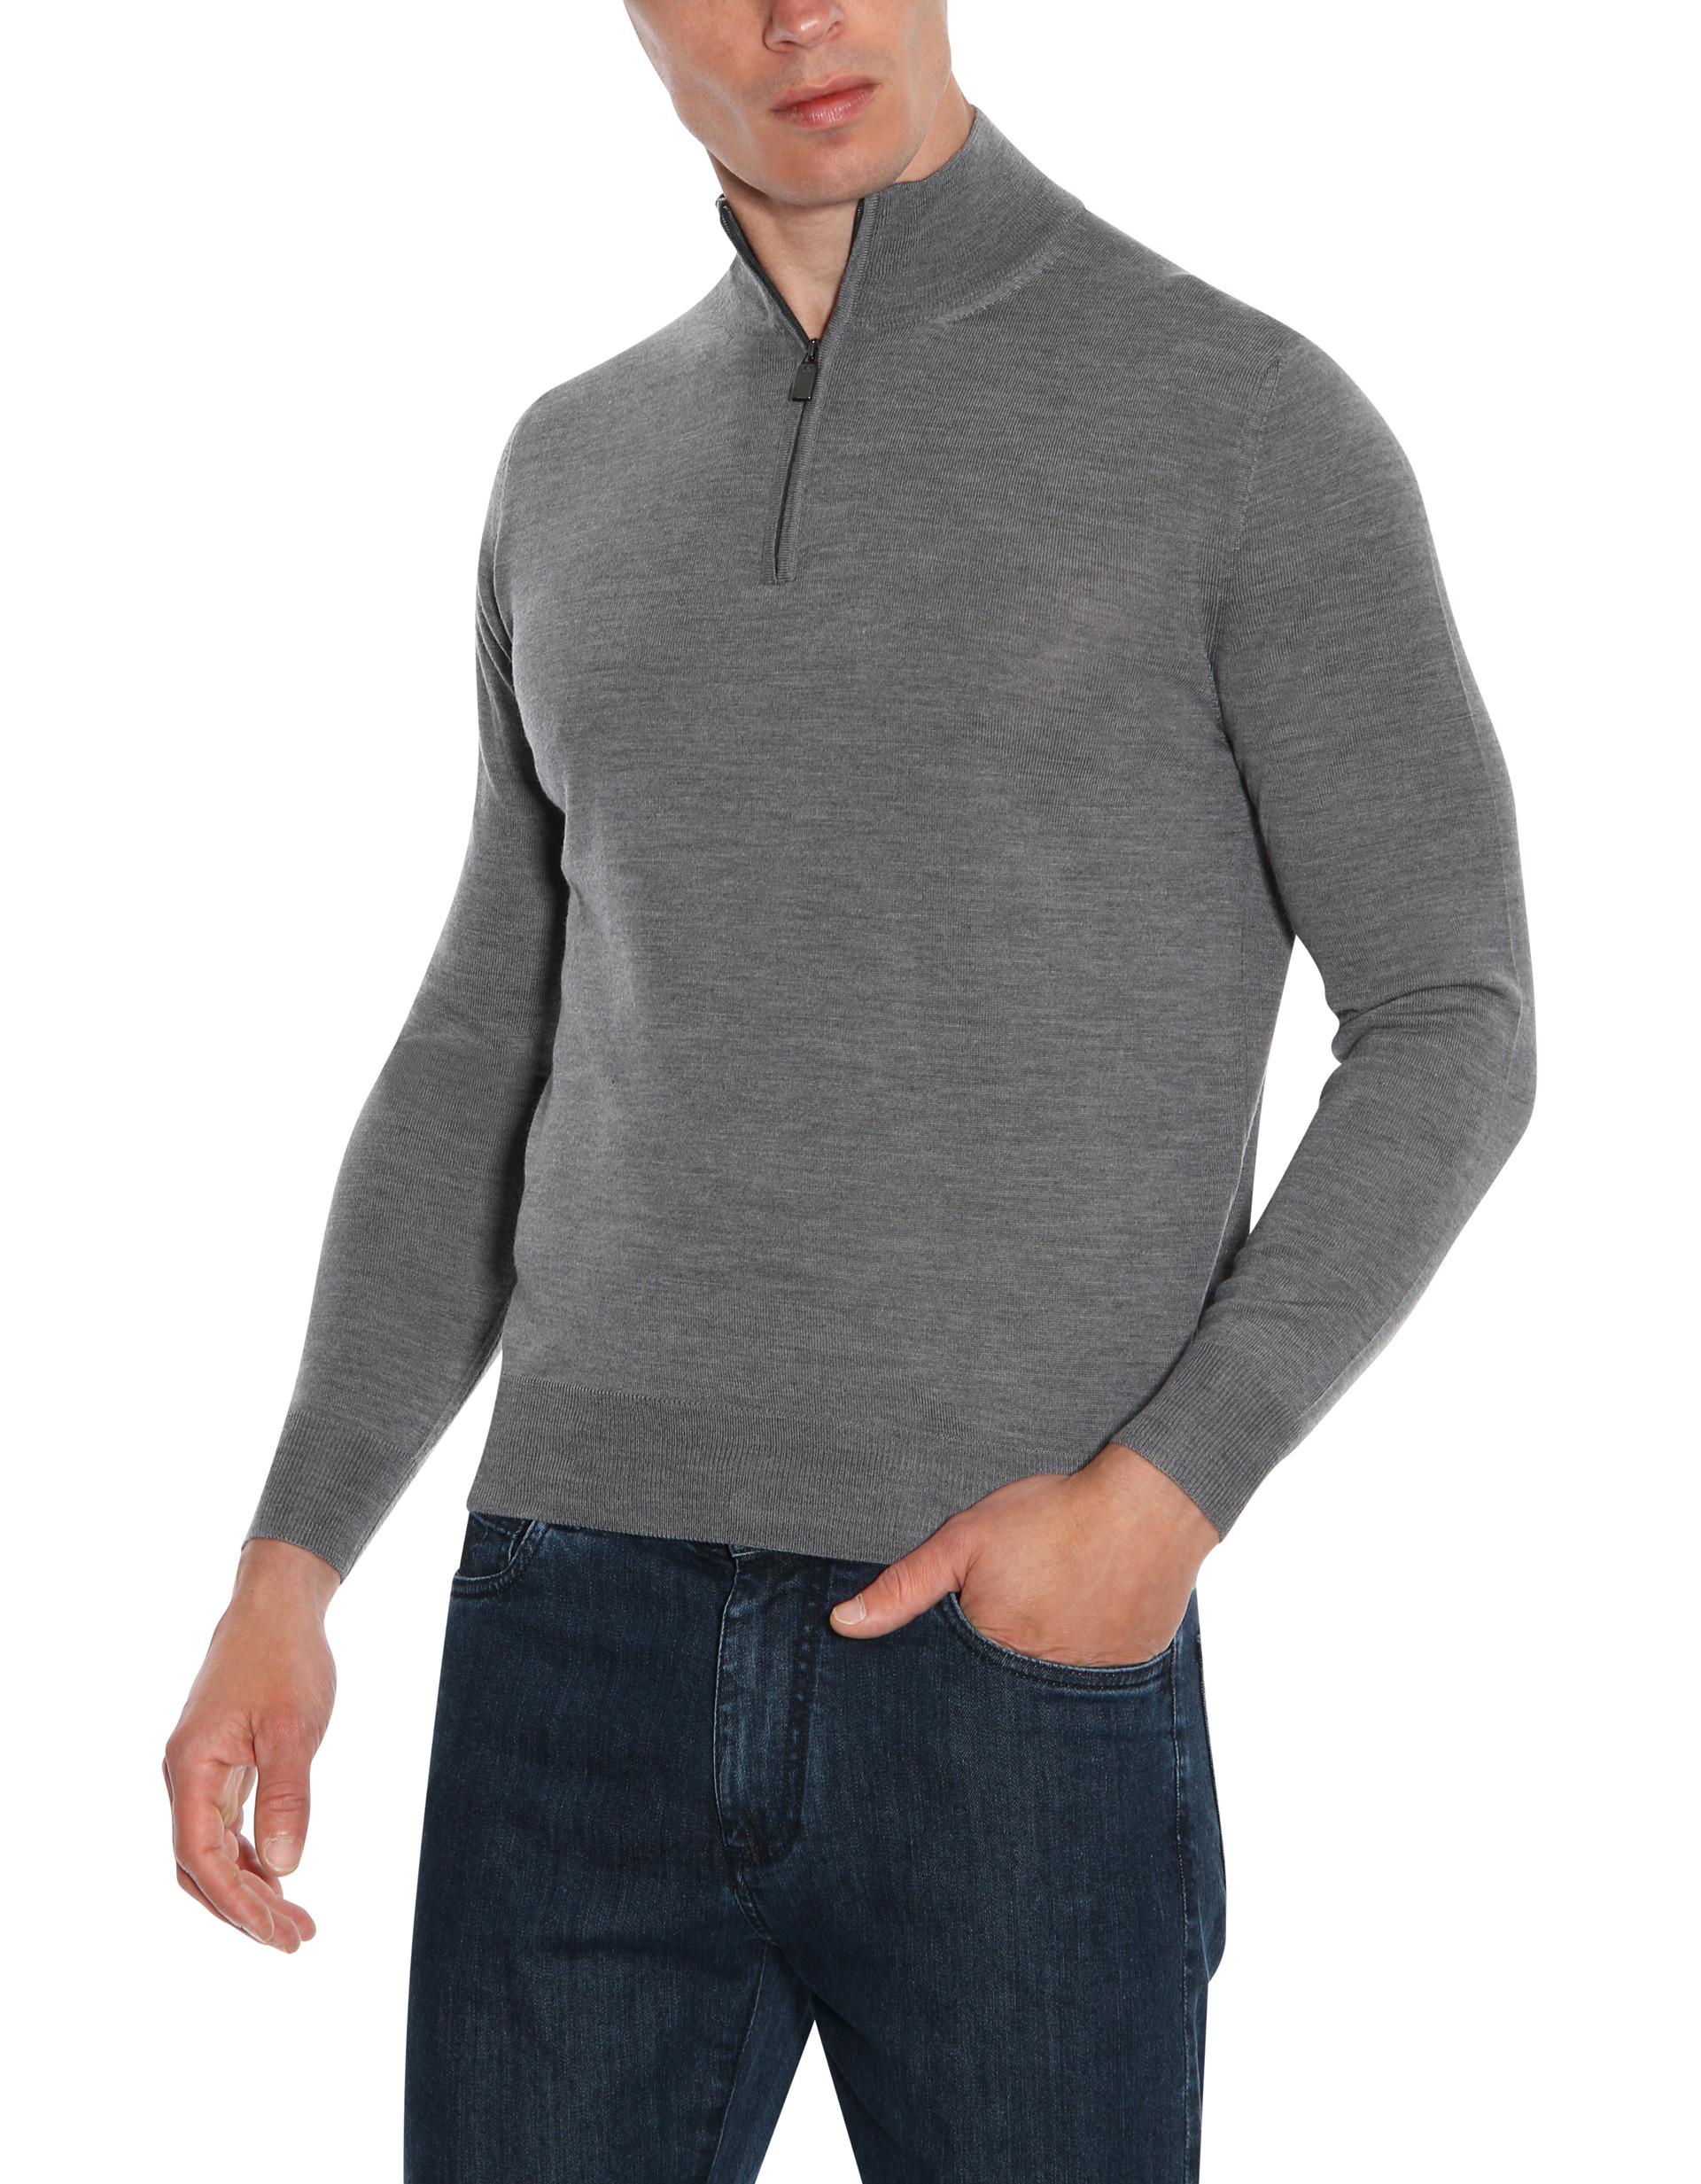 Canali Gray Pure Wool Quarter Zip Sweater for Men - Lyst